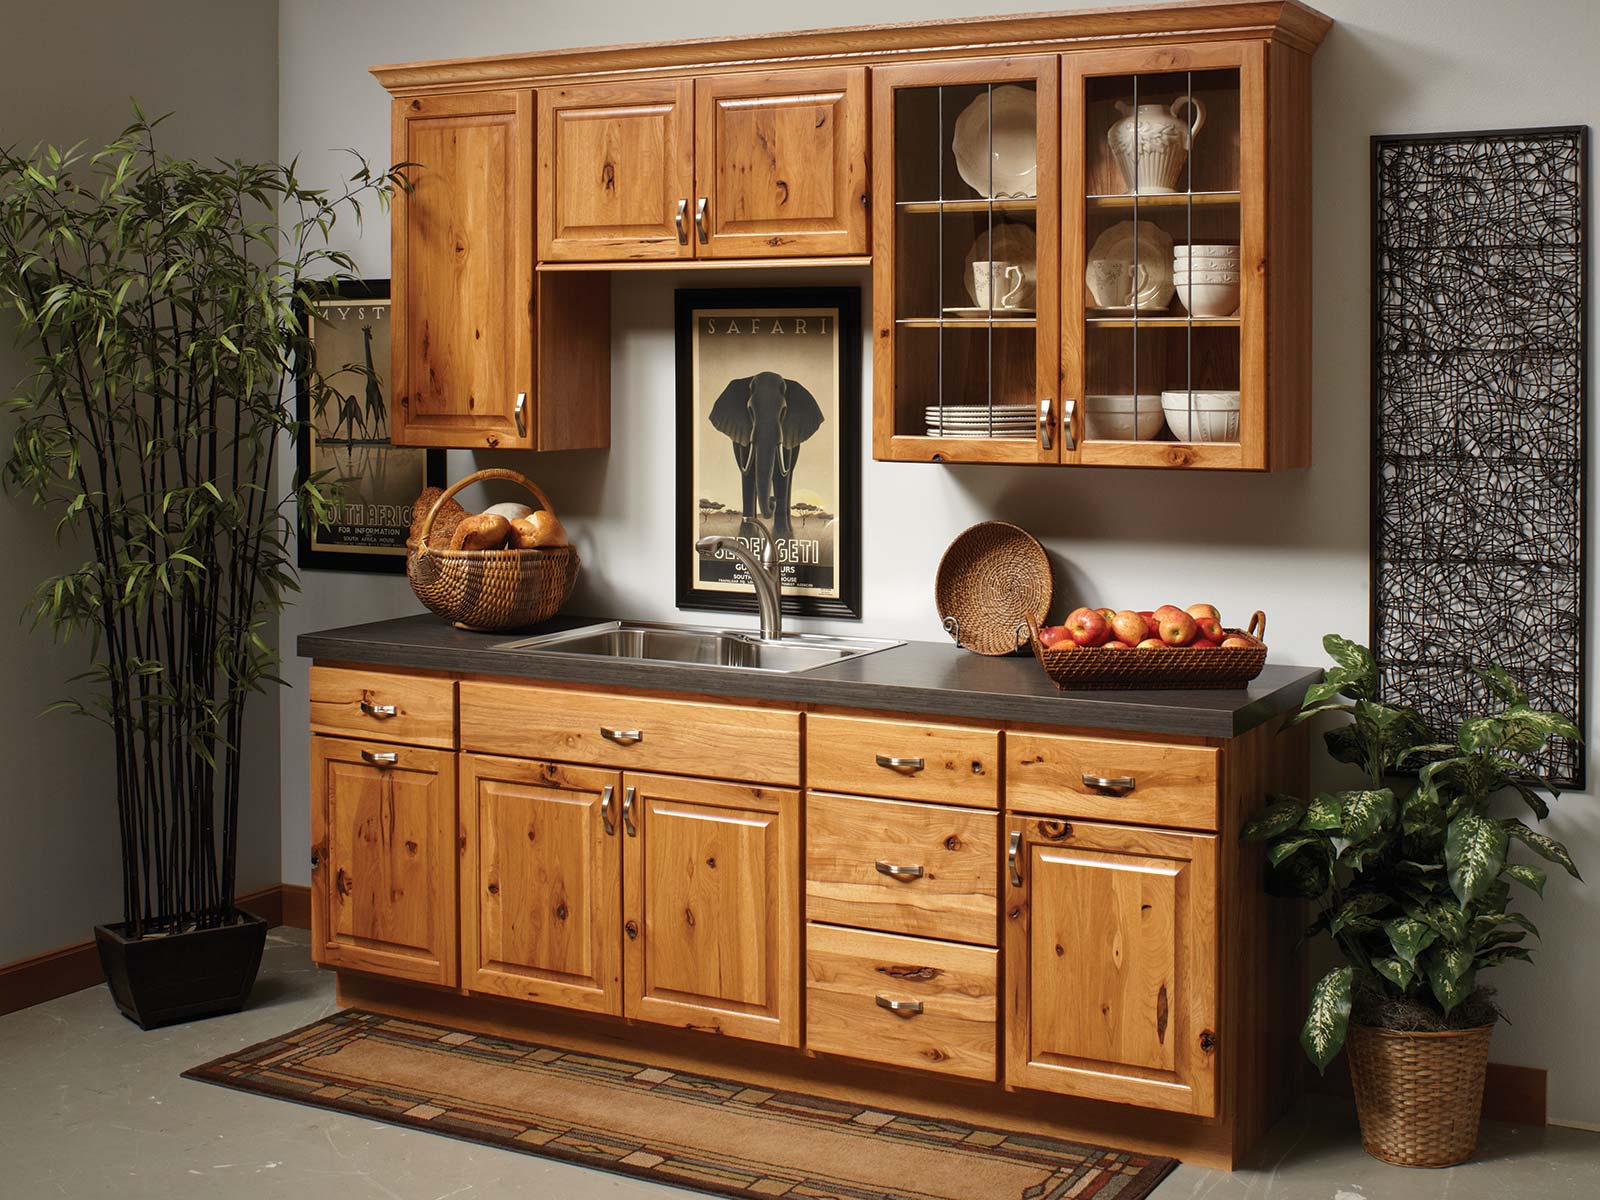 Rustic kitchenette with hickory kitchen cabinets